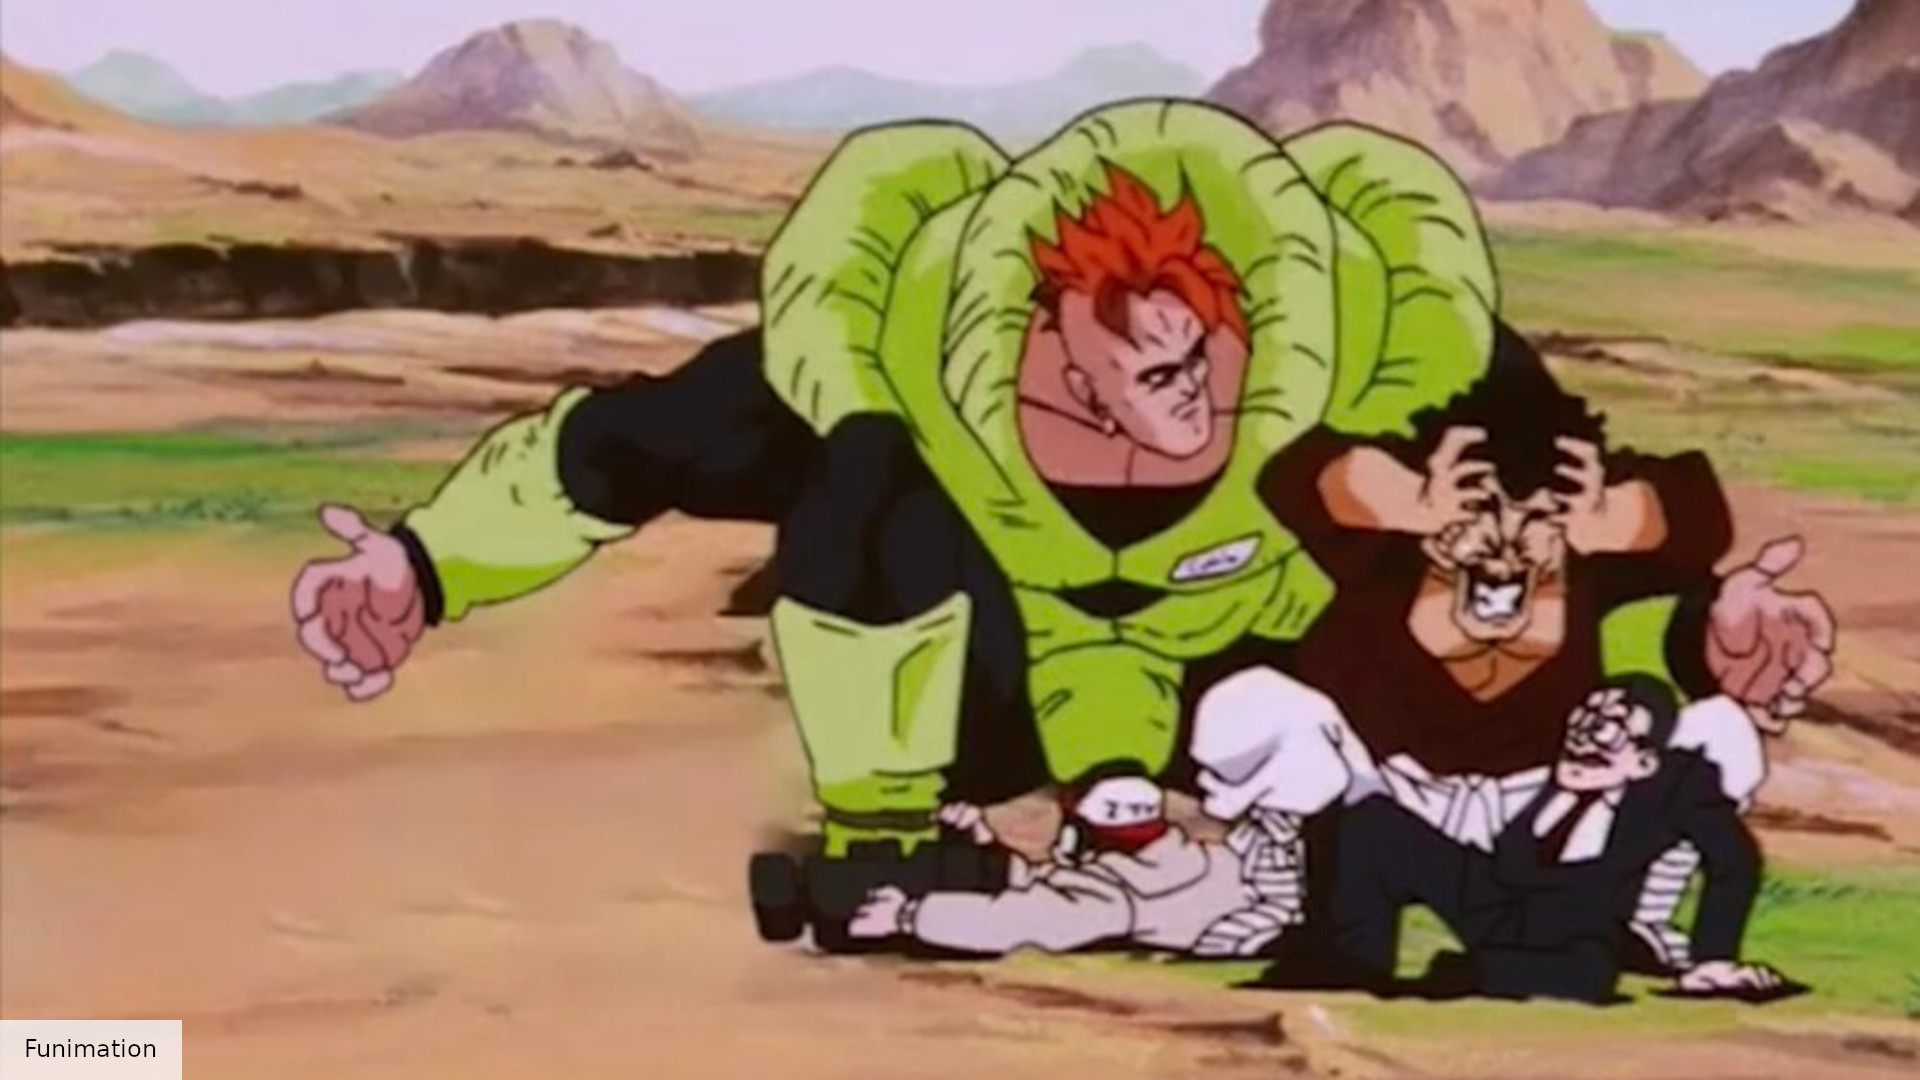 Best DBZ characters: Android 16